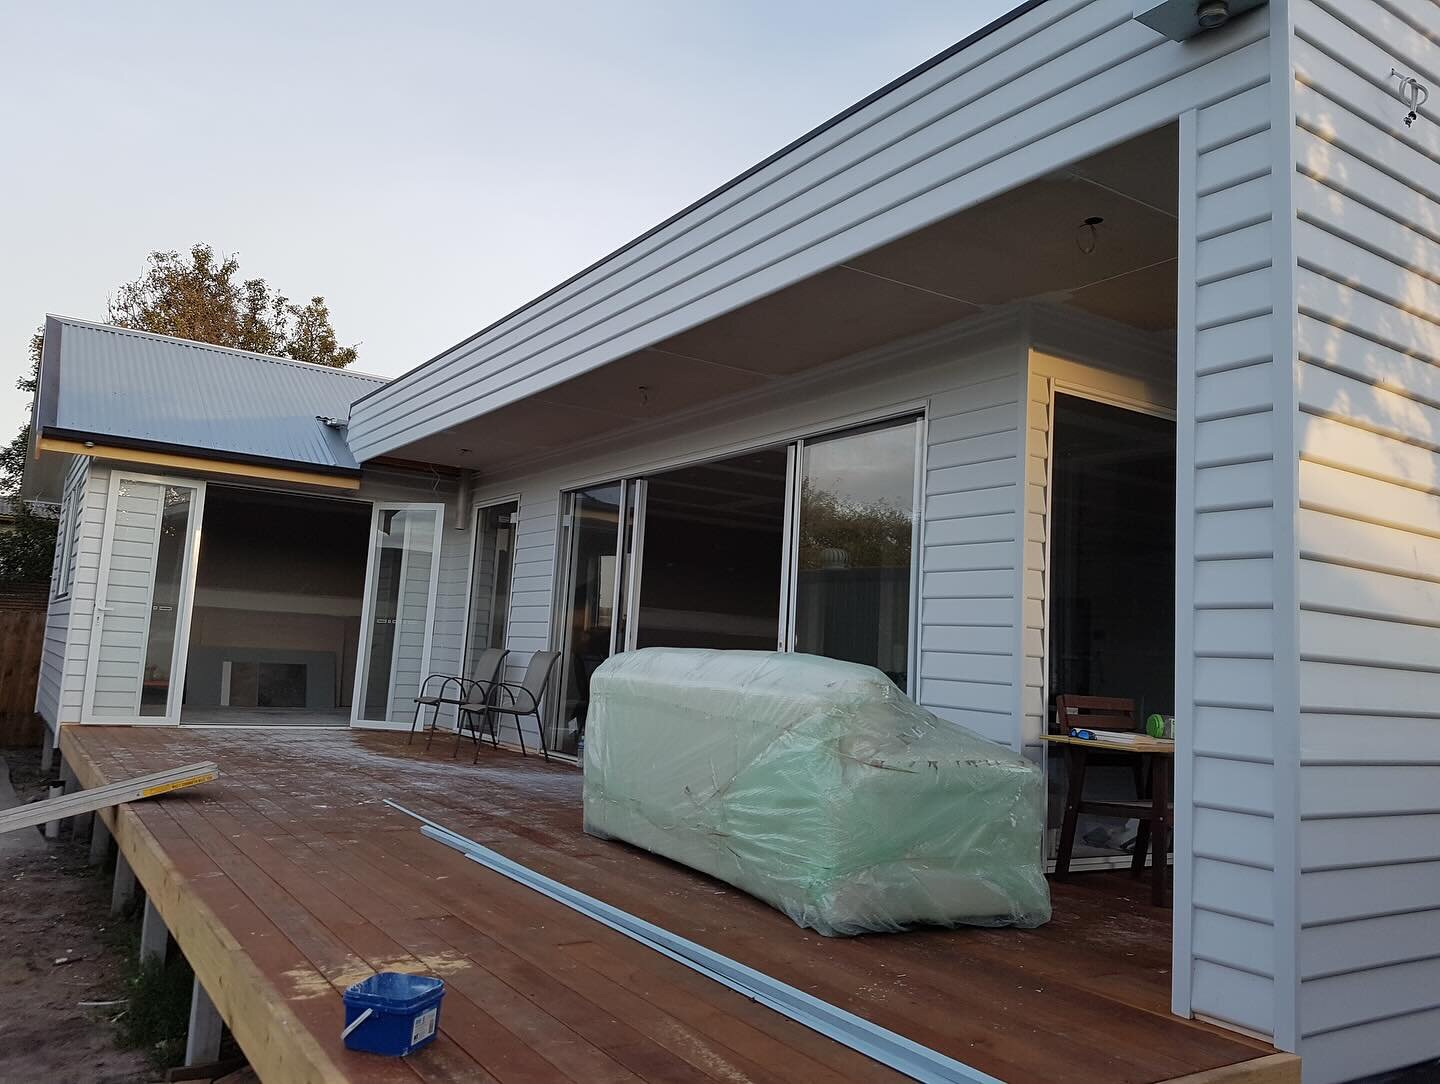 Greville Street, Oakleigh: Construction Update

Nestled in the leafy surroundings of Oakleigh, our Greville St Extension project is coming to life!

Project Highlights:
- Extension to an existing home
- Back end completely opened up
- Open plan livin